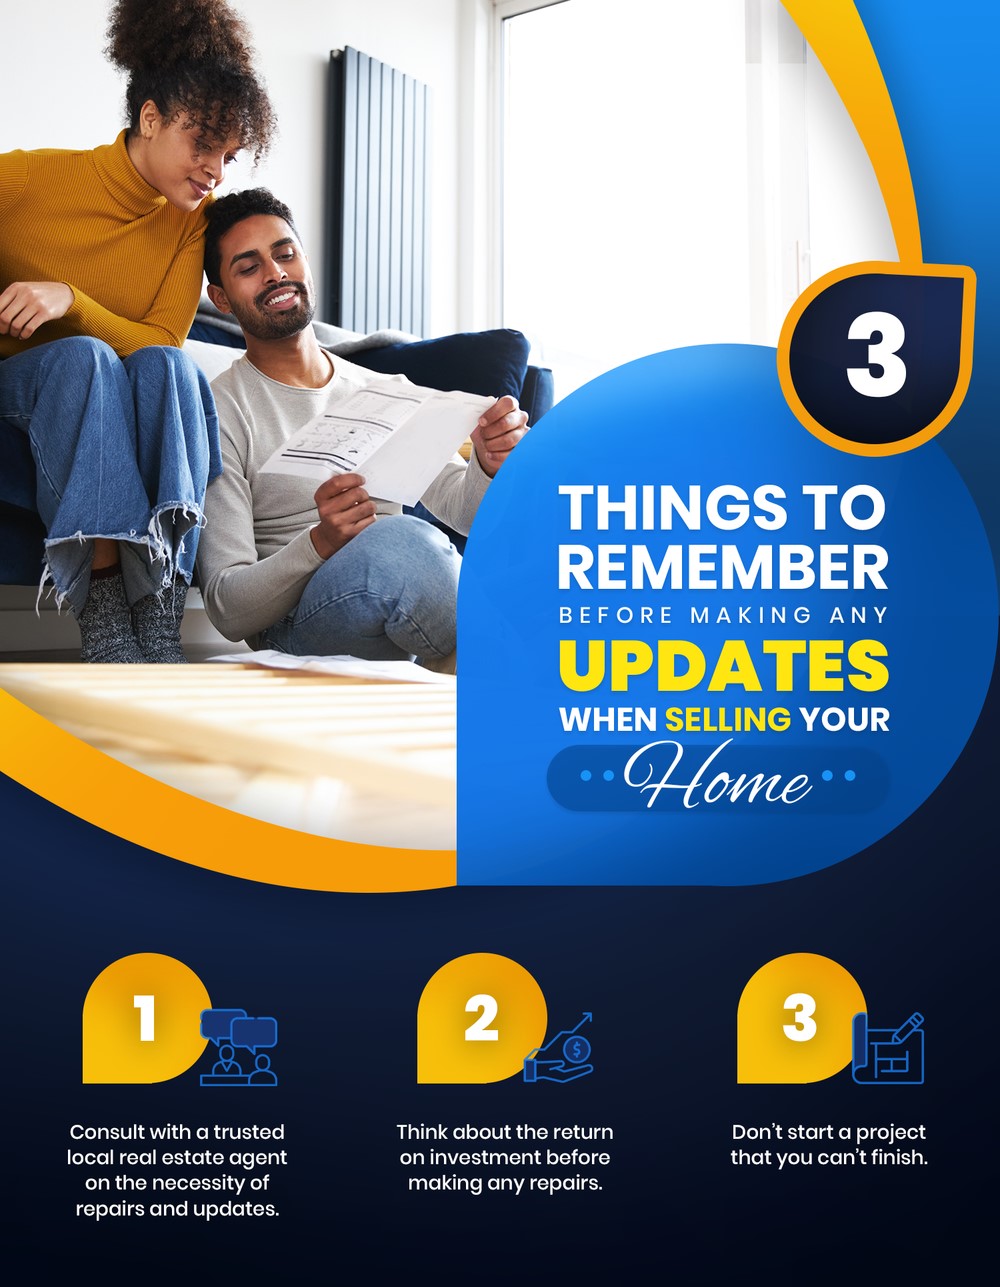 3 Things To Remember Before Making Any Updates When Selling Your Home